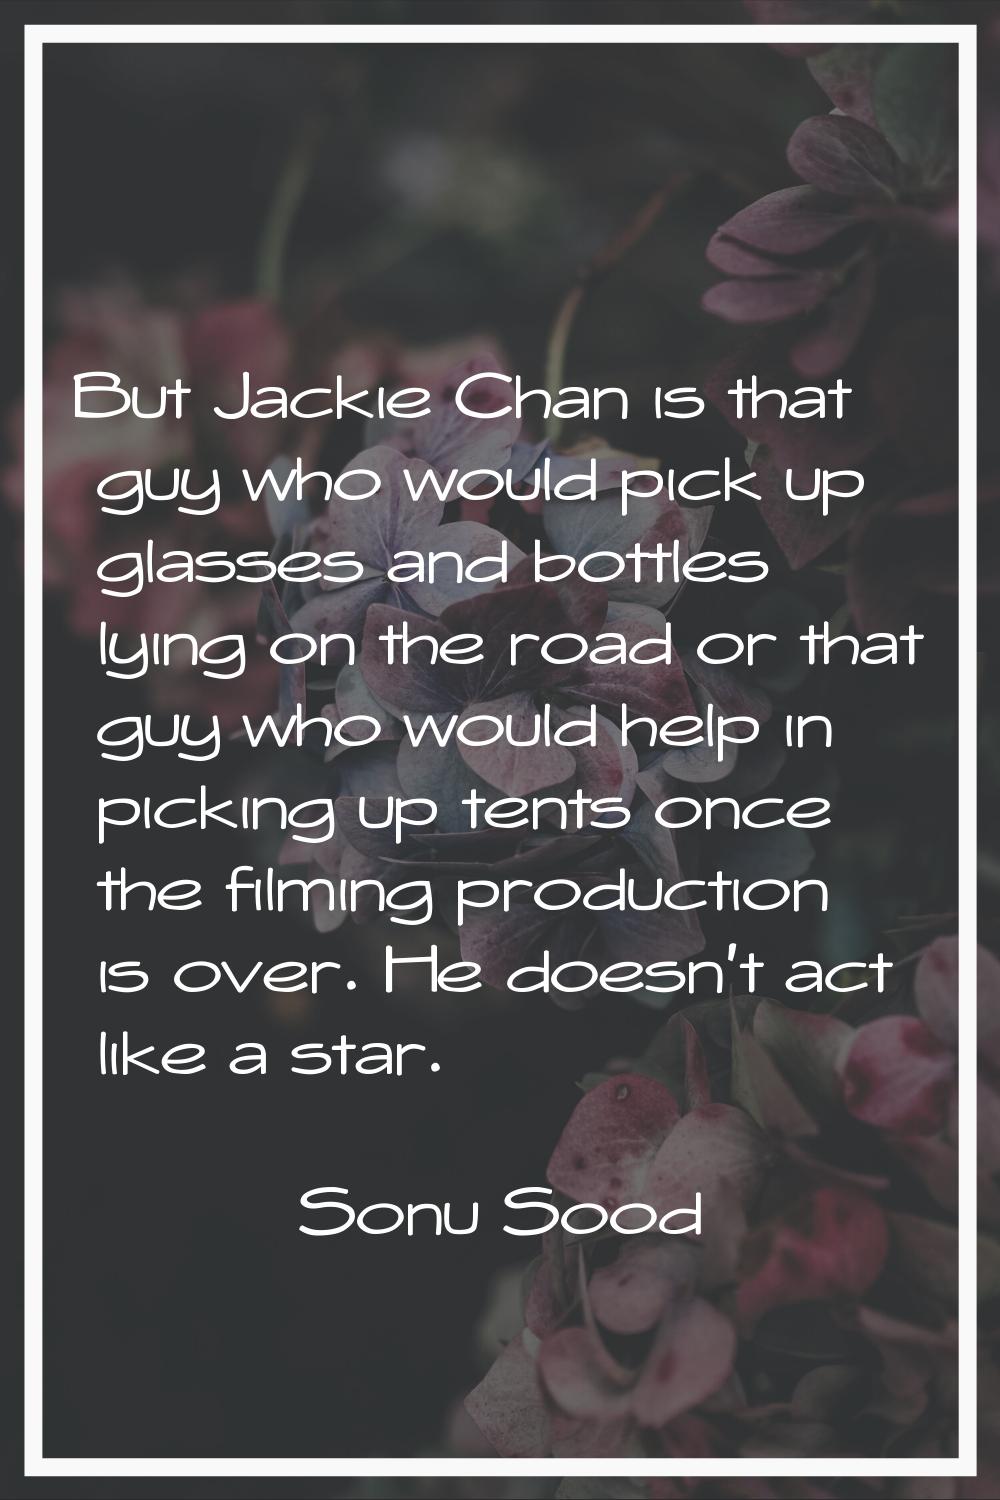 But Jackie Chan is that guy who would pick up glasses and bottles lying on the road or that guy who